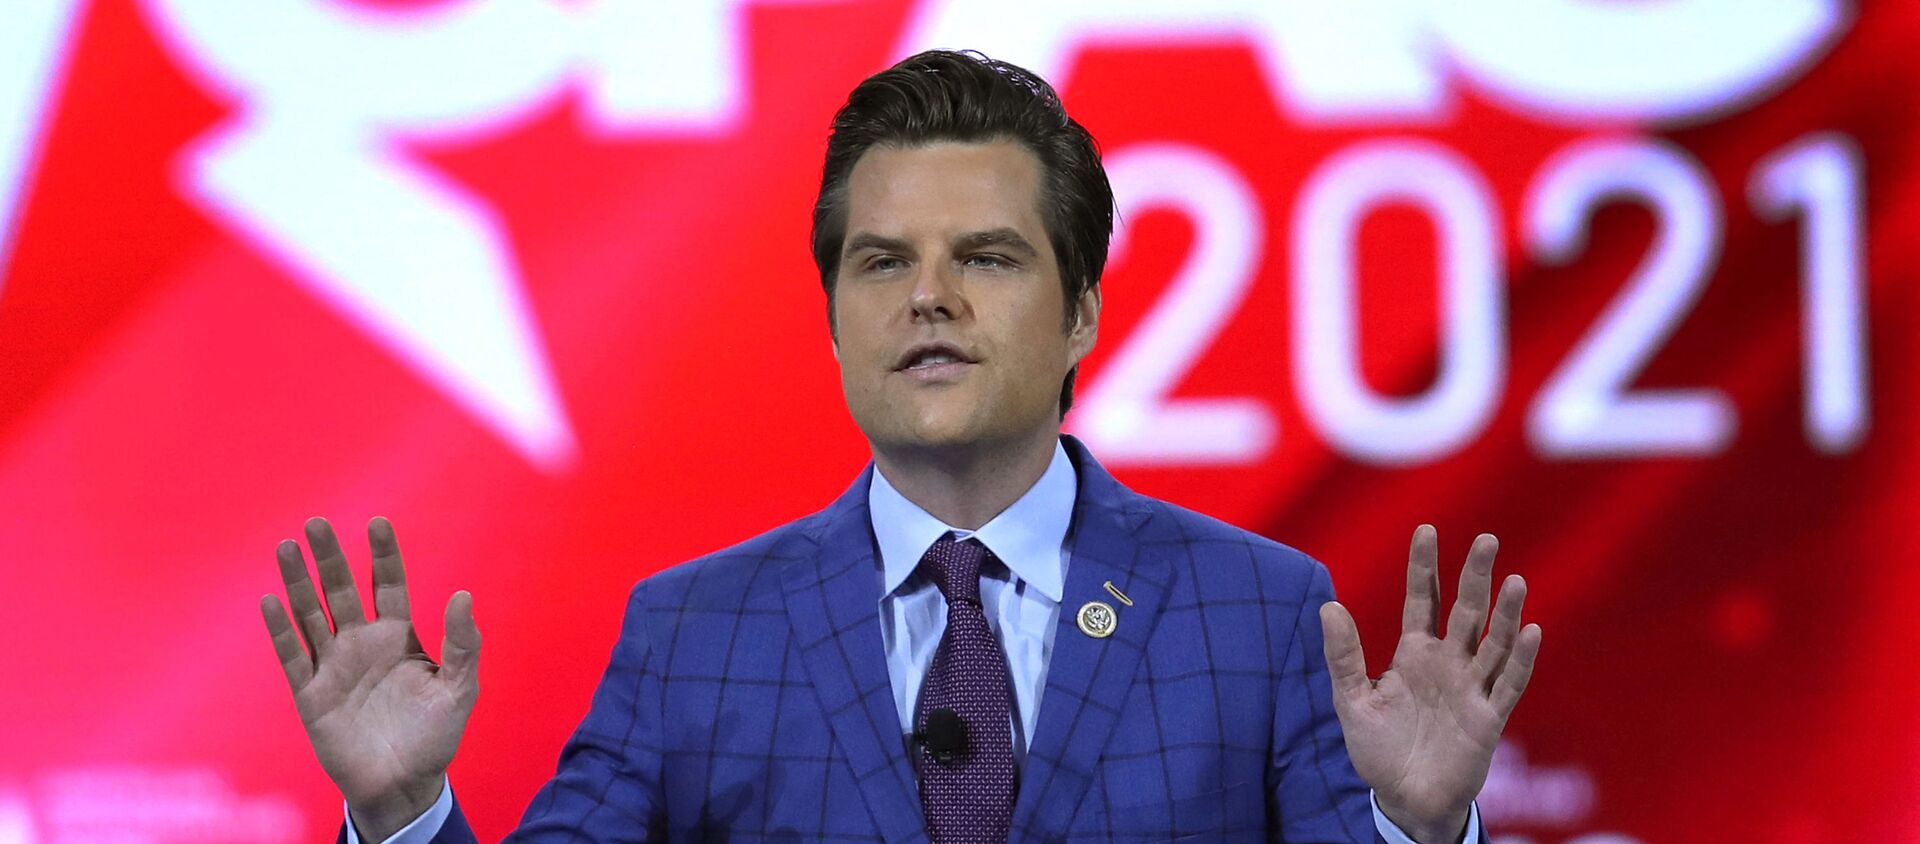 Rep. Matt Gaetz (R-FL) addresses the Conservative Political Action Conference being held in the Hyatt Regency on February 26, 2021 in Orlando, Florida.  Joe Raedle/Getty Images/AFP (Photo by JOE RAEDLE / GETTY IMAGES NORTH AMERICA / Getty Images via AFP) - Sputnik International, 1920, 22.05.2021